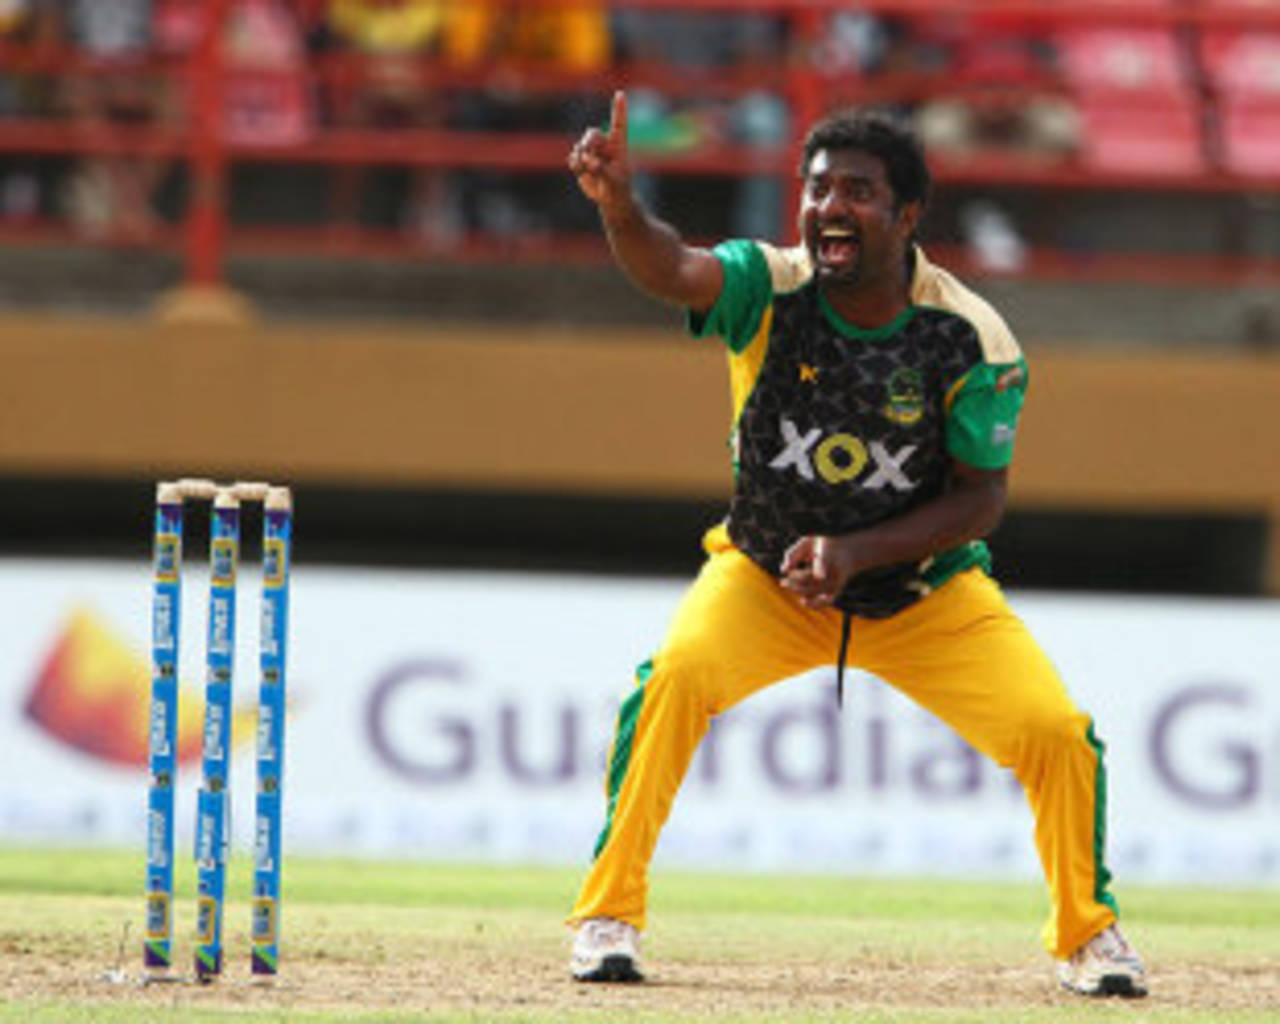 Muttiah Muralitharan picked up two wickets in an over, Antigua Hawksbills v Jamaica Tallawahs, Caribbean Premier League 2013, Providence, August 4, 2013